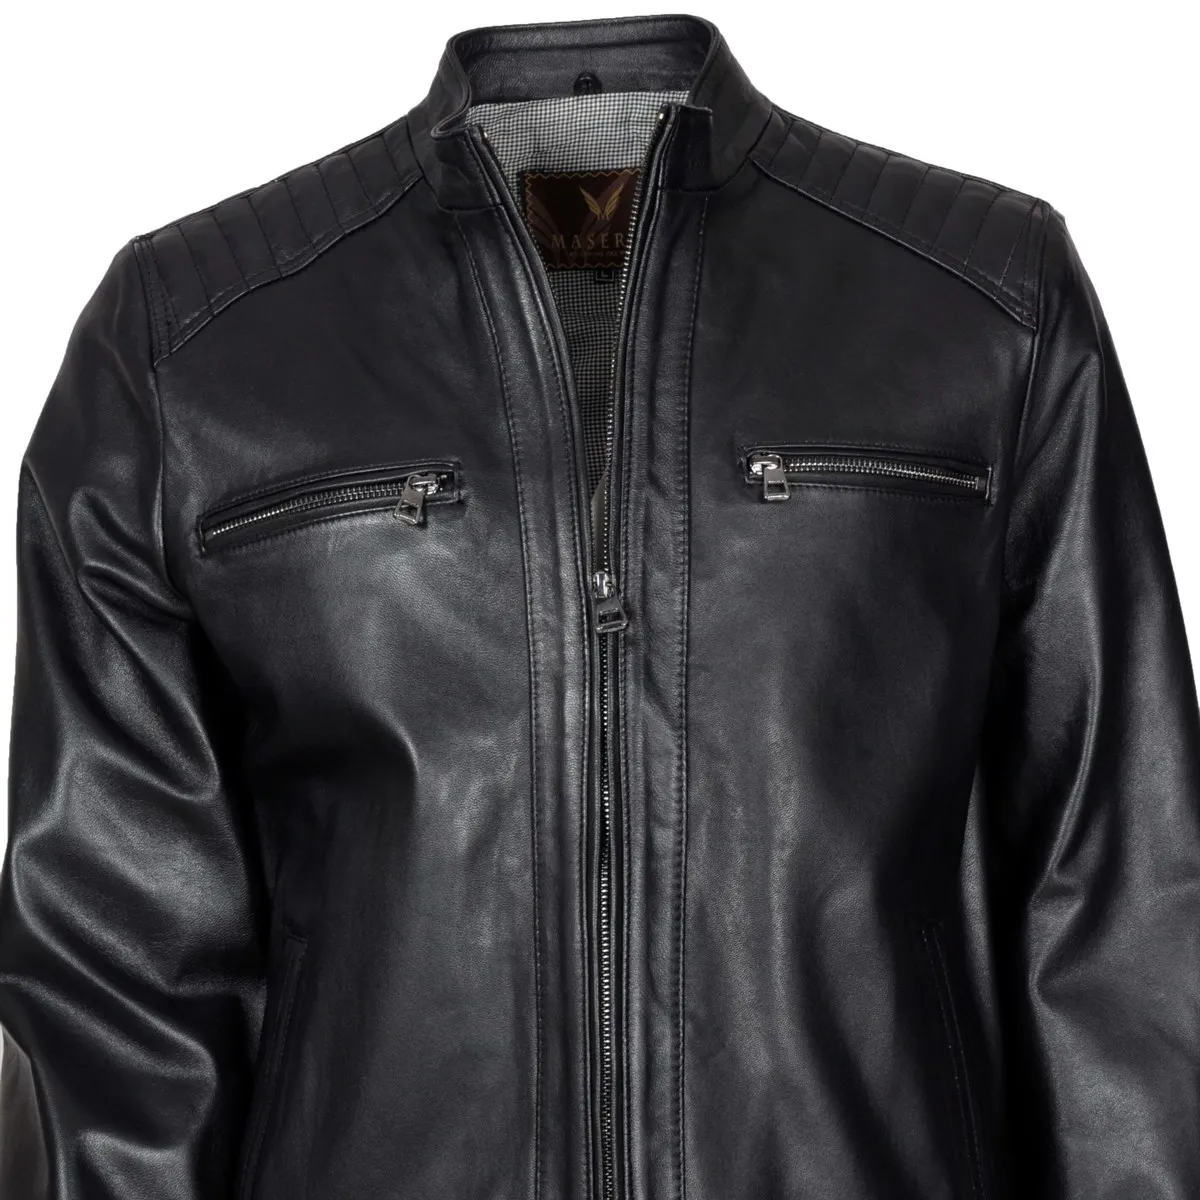 High Quality Maserto High Collar Black Leather Jacket Wholesale Product - The Most Preferred Men's Coat